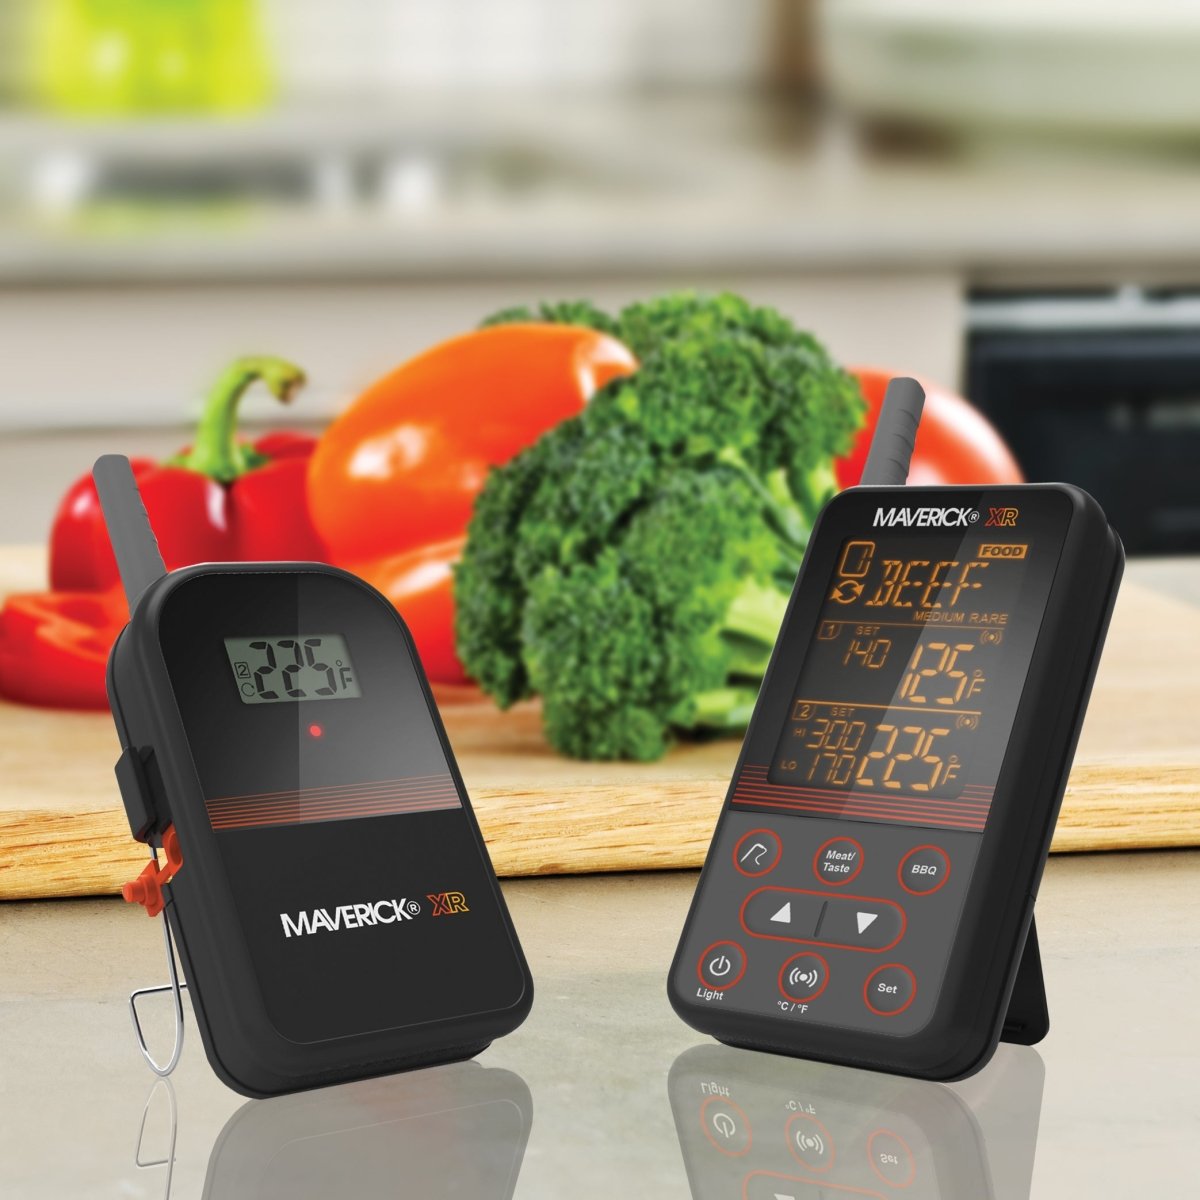 Maverick Extended Range Wireless BBQ and Meat Thermometer